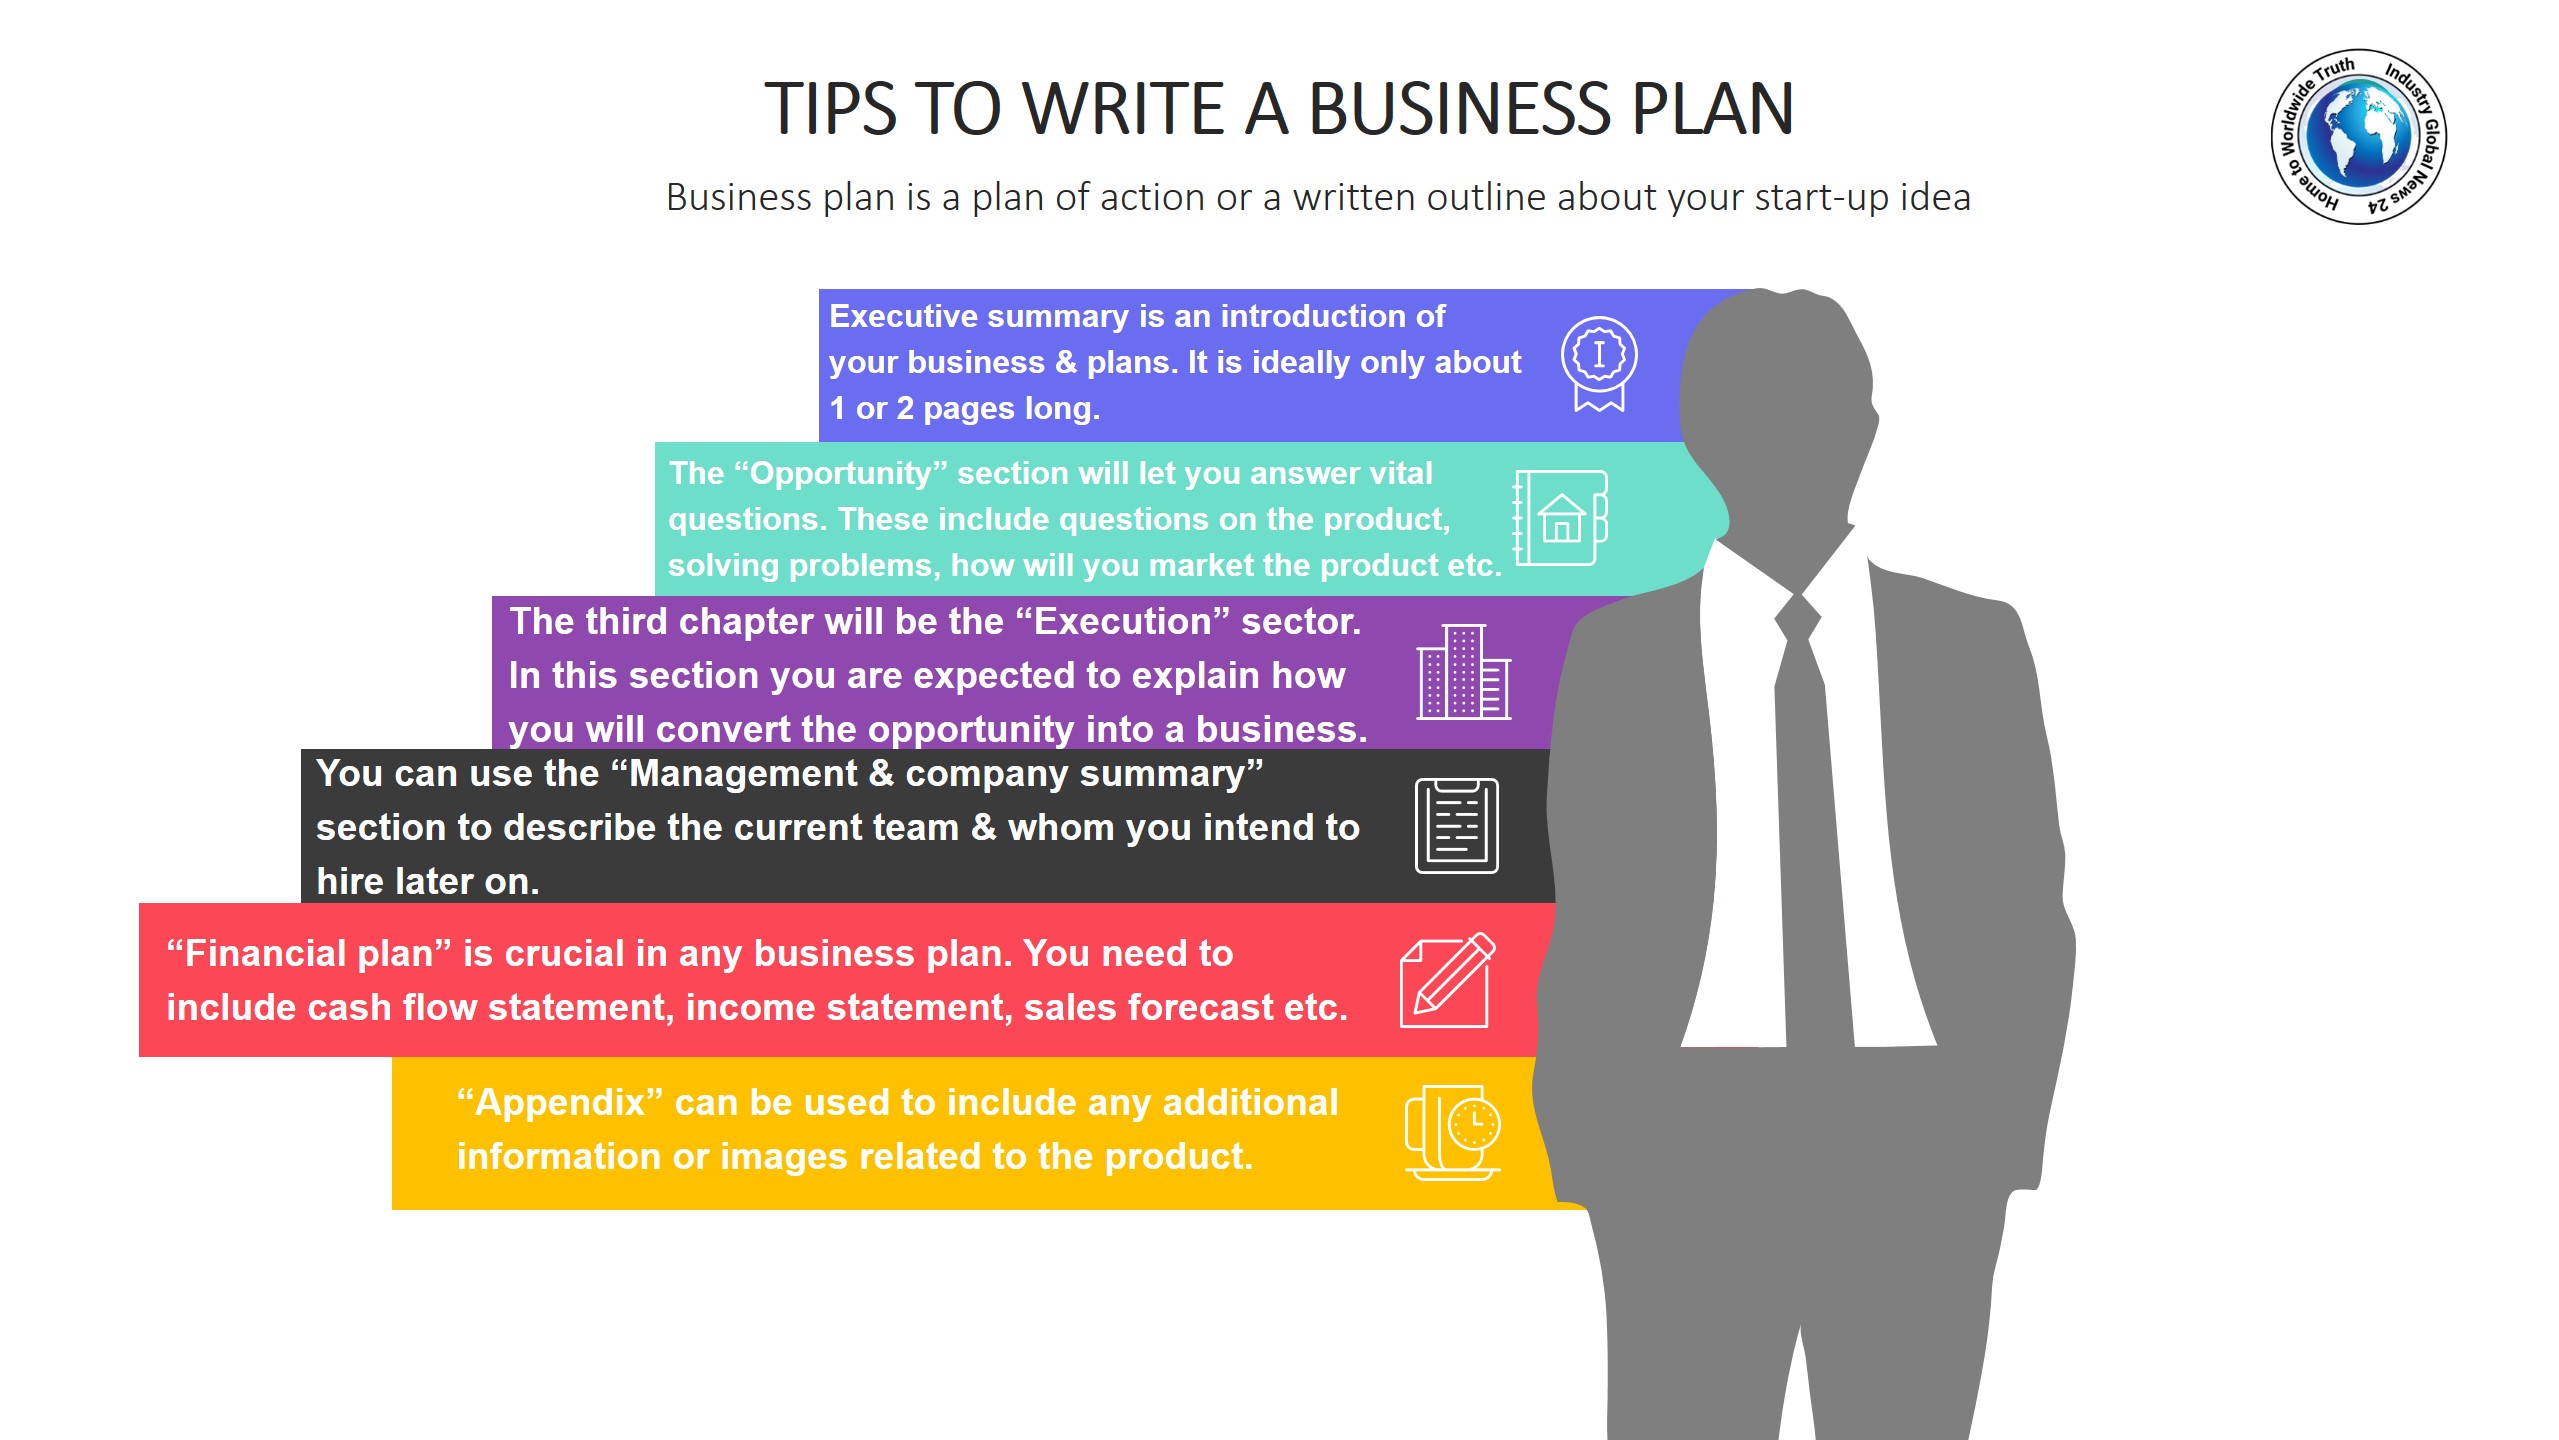 Tips to write a business plan